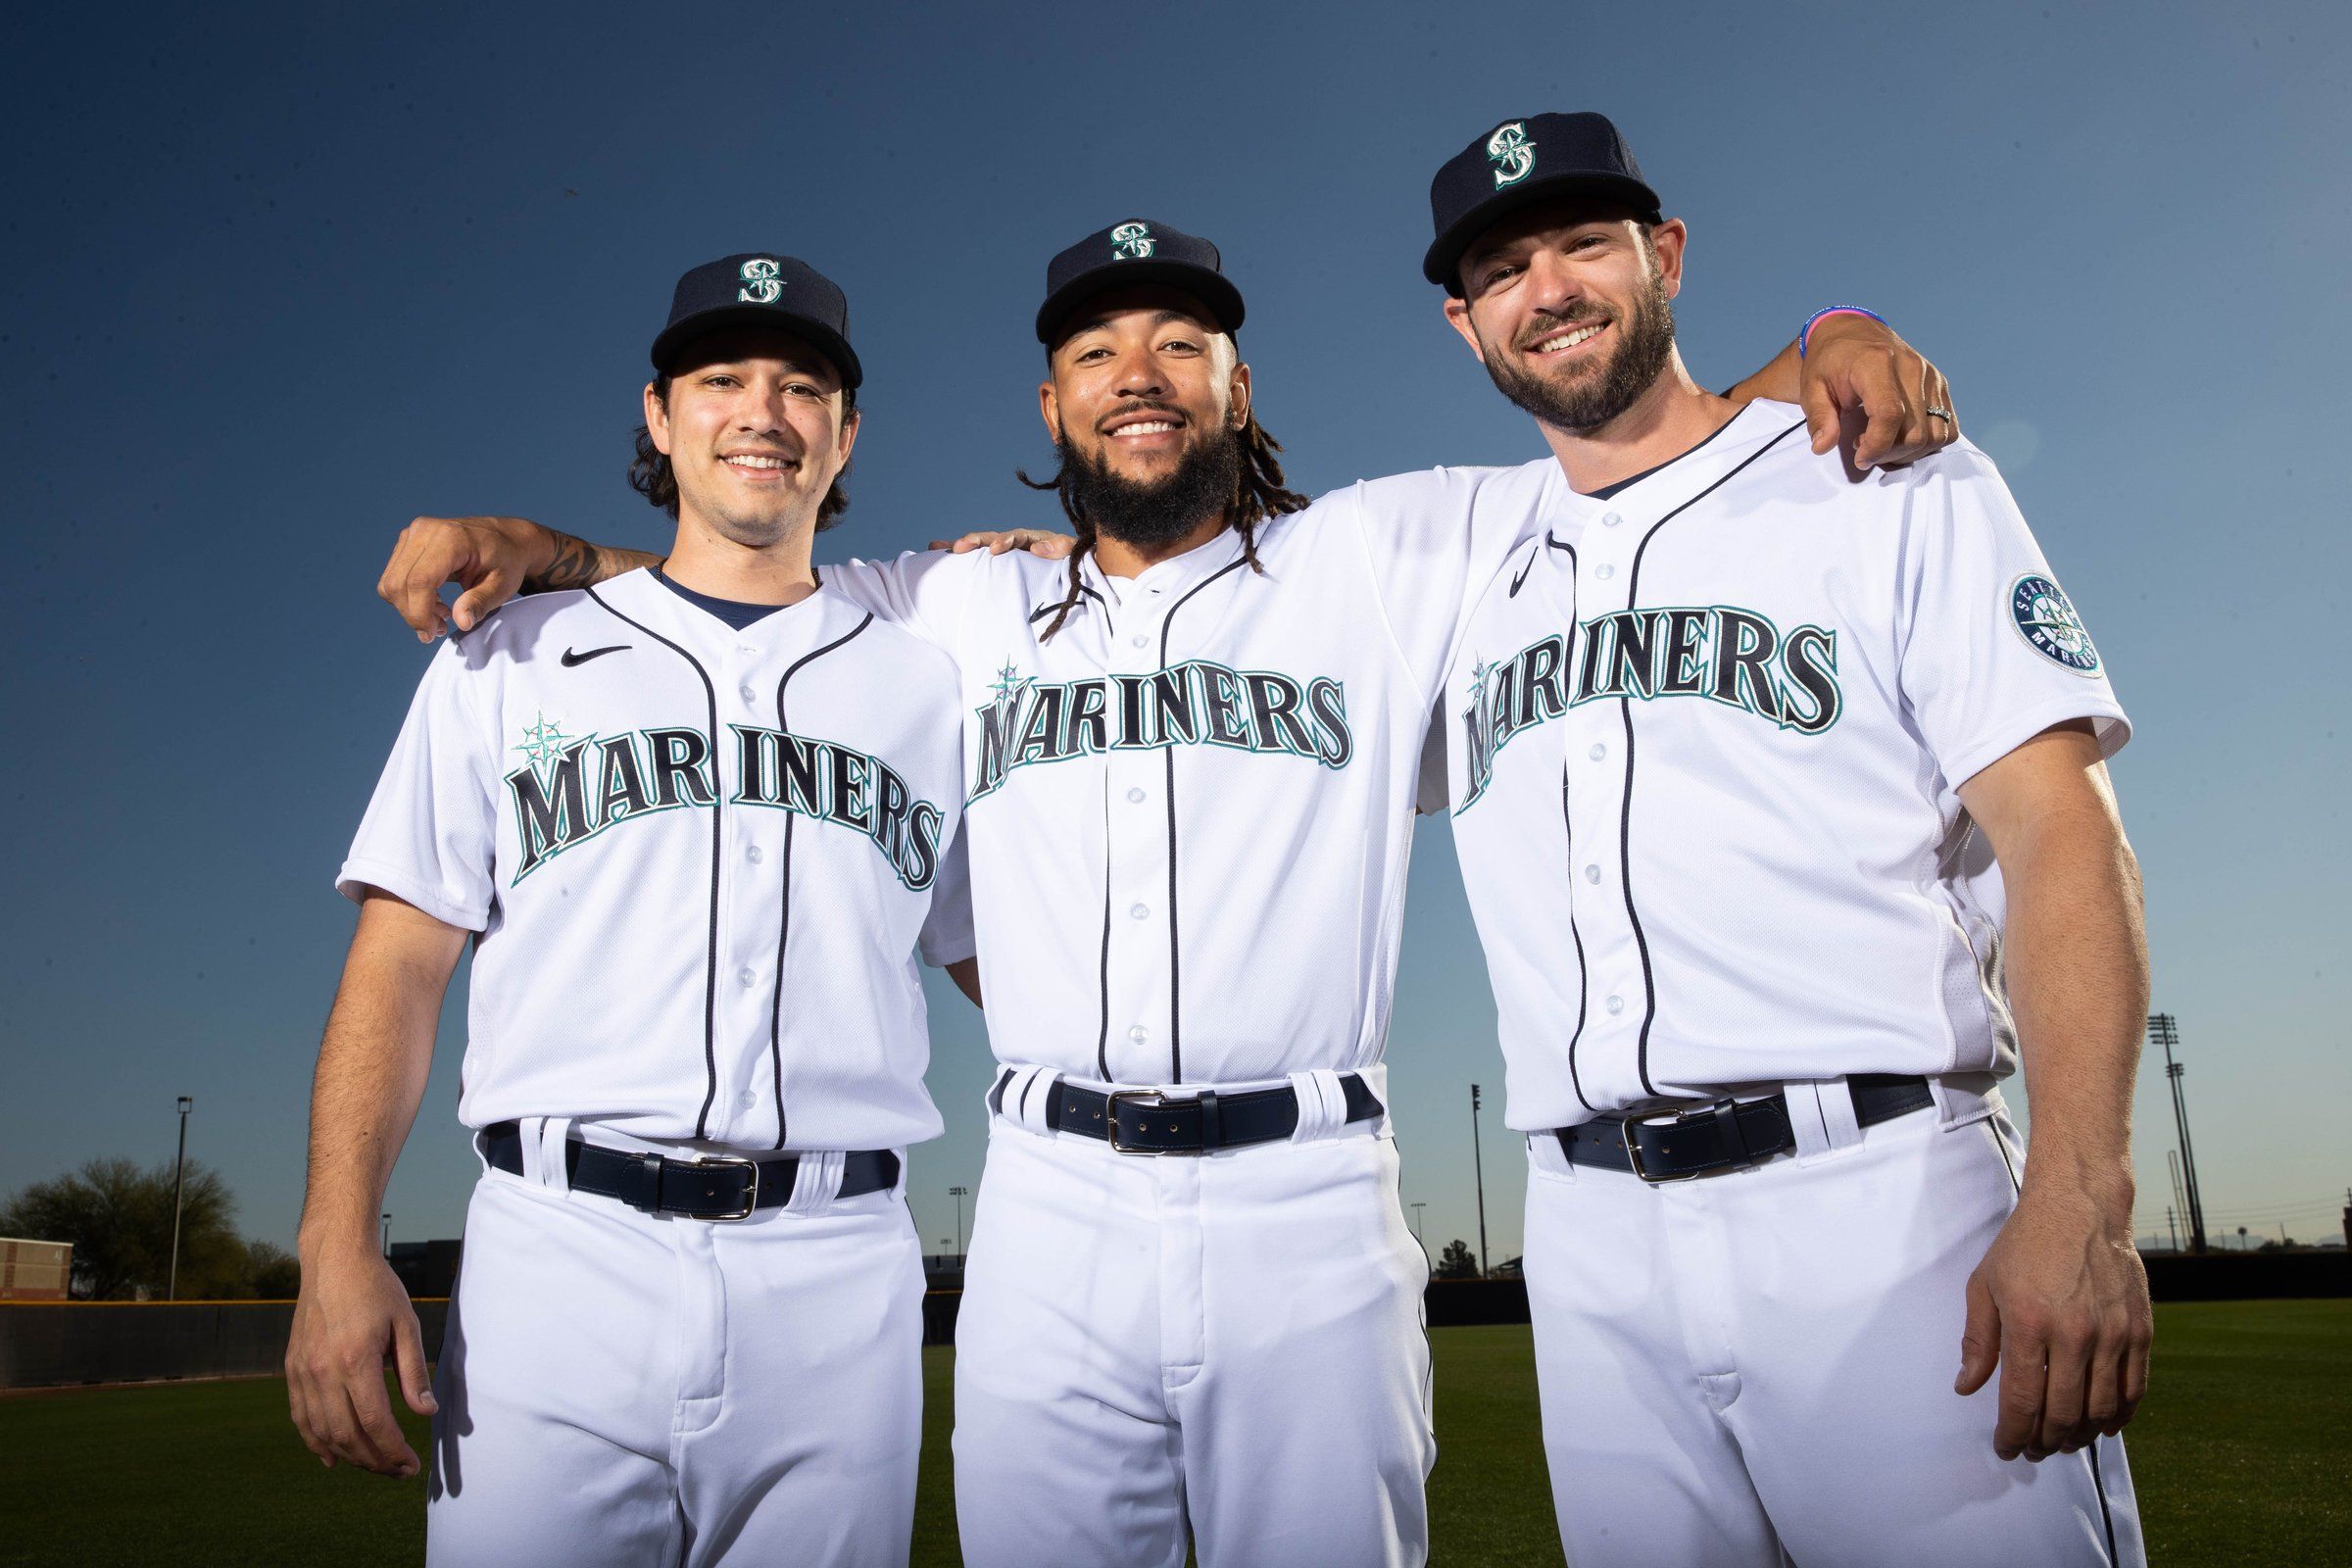 Mariners player jersey impact on the team